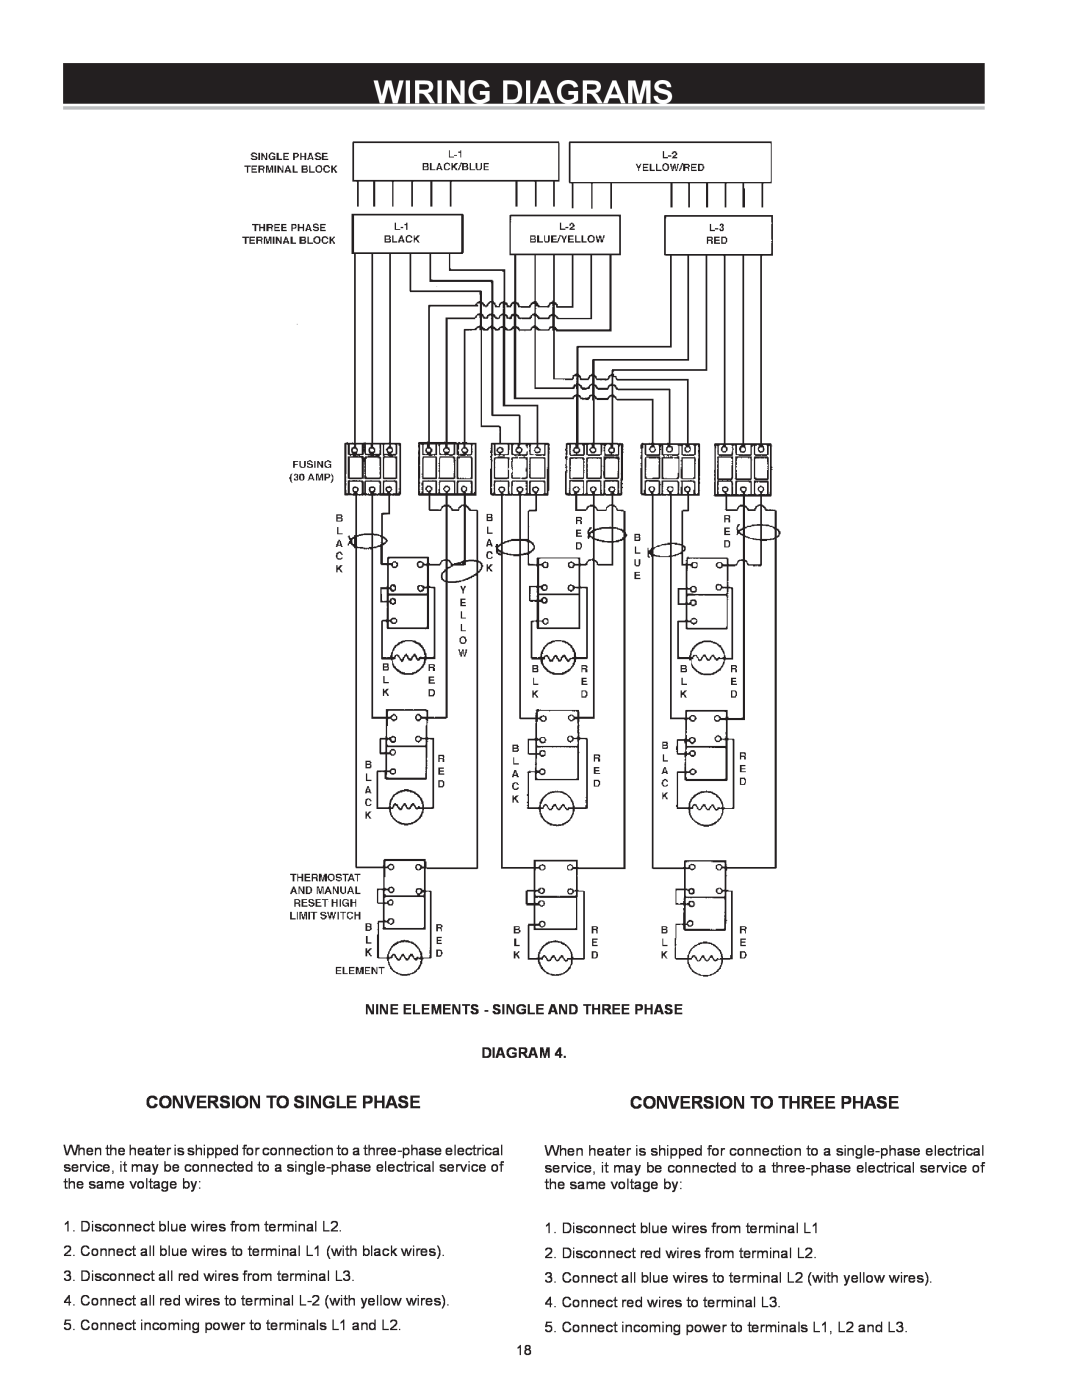 A.O. Smith Dve-52/80/120 Nine Elements - Single And Three Phase Diagram, Wiring Diagrams, Conversion To Single Phase 